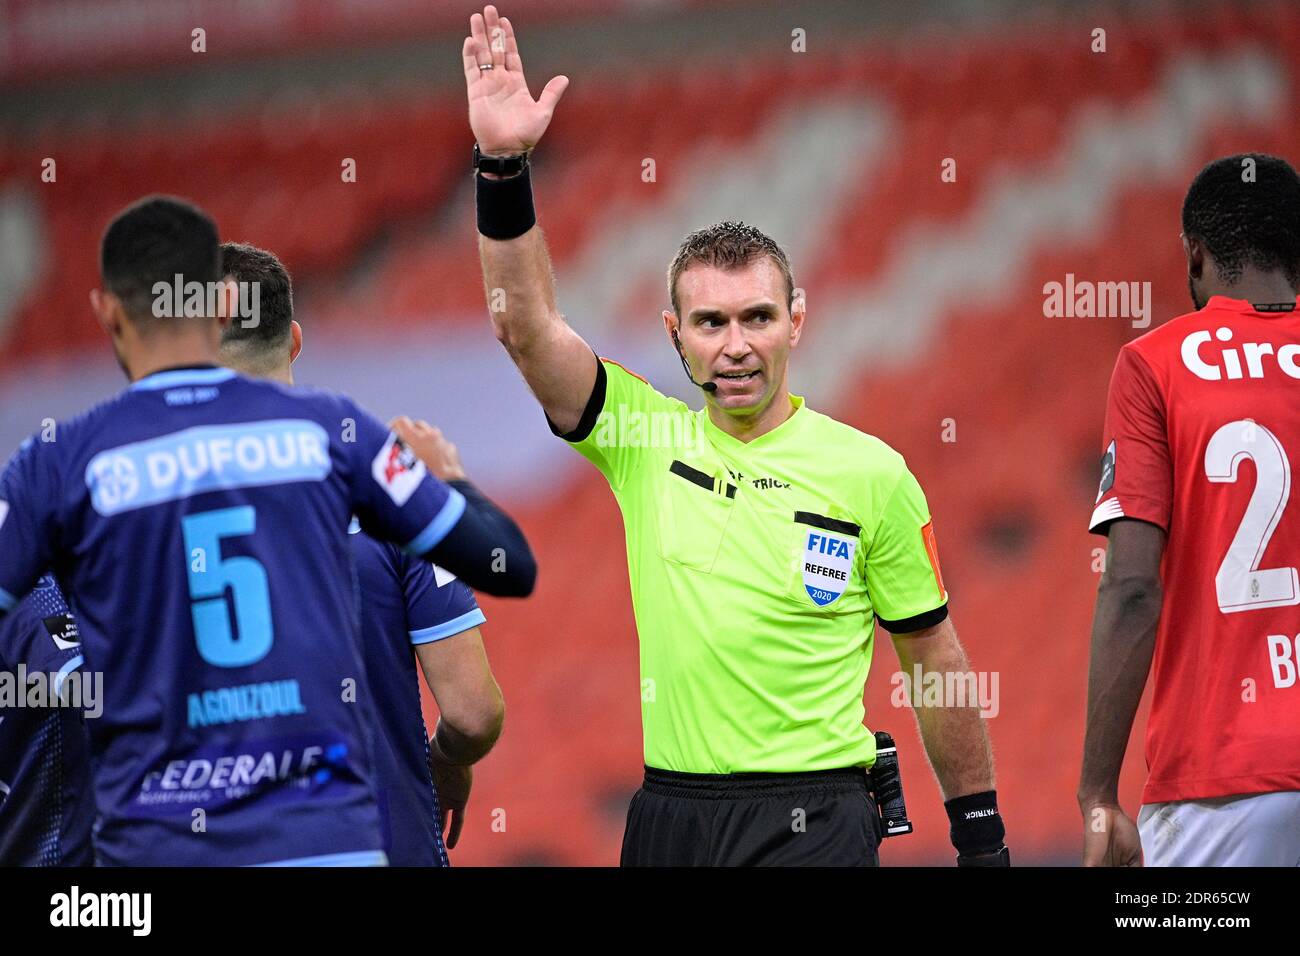 referee Nicolas Laforge pictured during a soccer match between Standard de Liege and RE Mouscron, Sunday 20 December 2020 in Liege, on the seventeenth Stock Photo